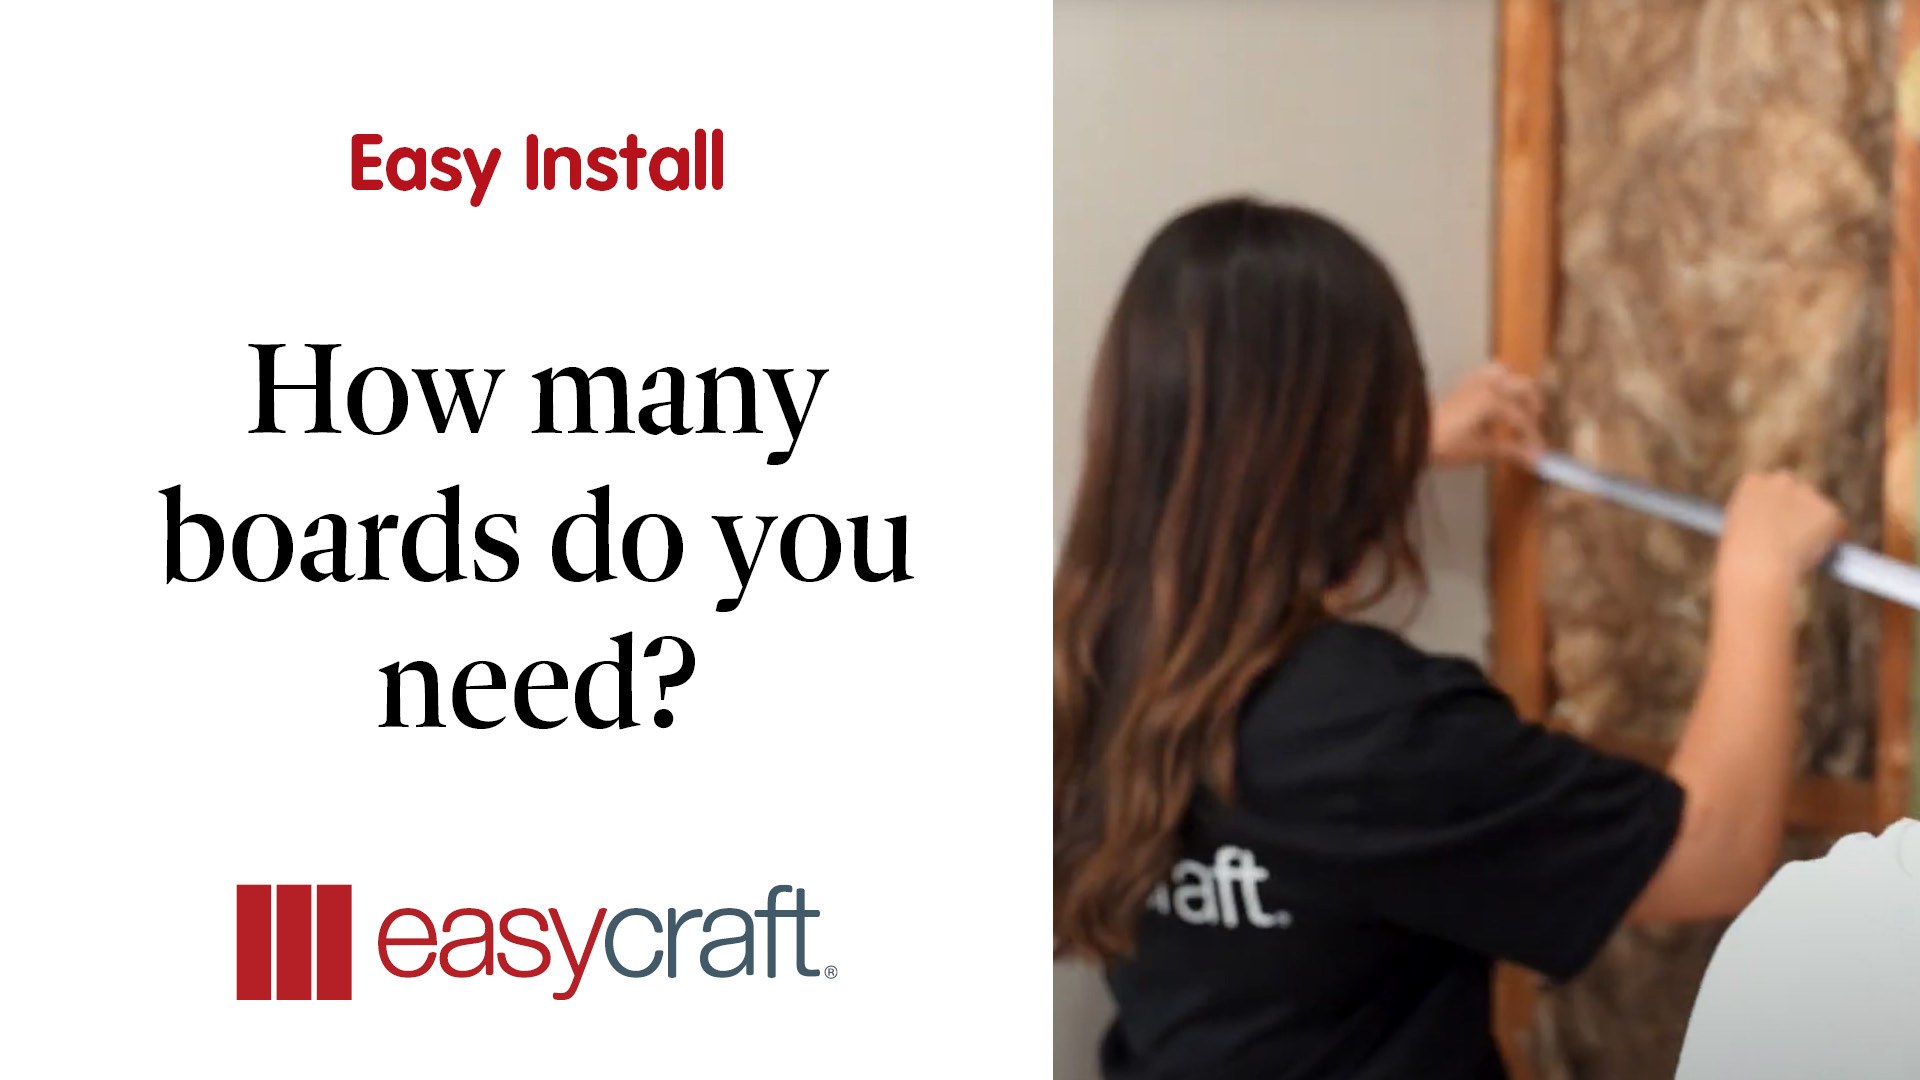 How Many Easycraft Boards Do I Need For My Install